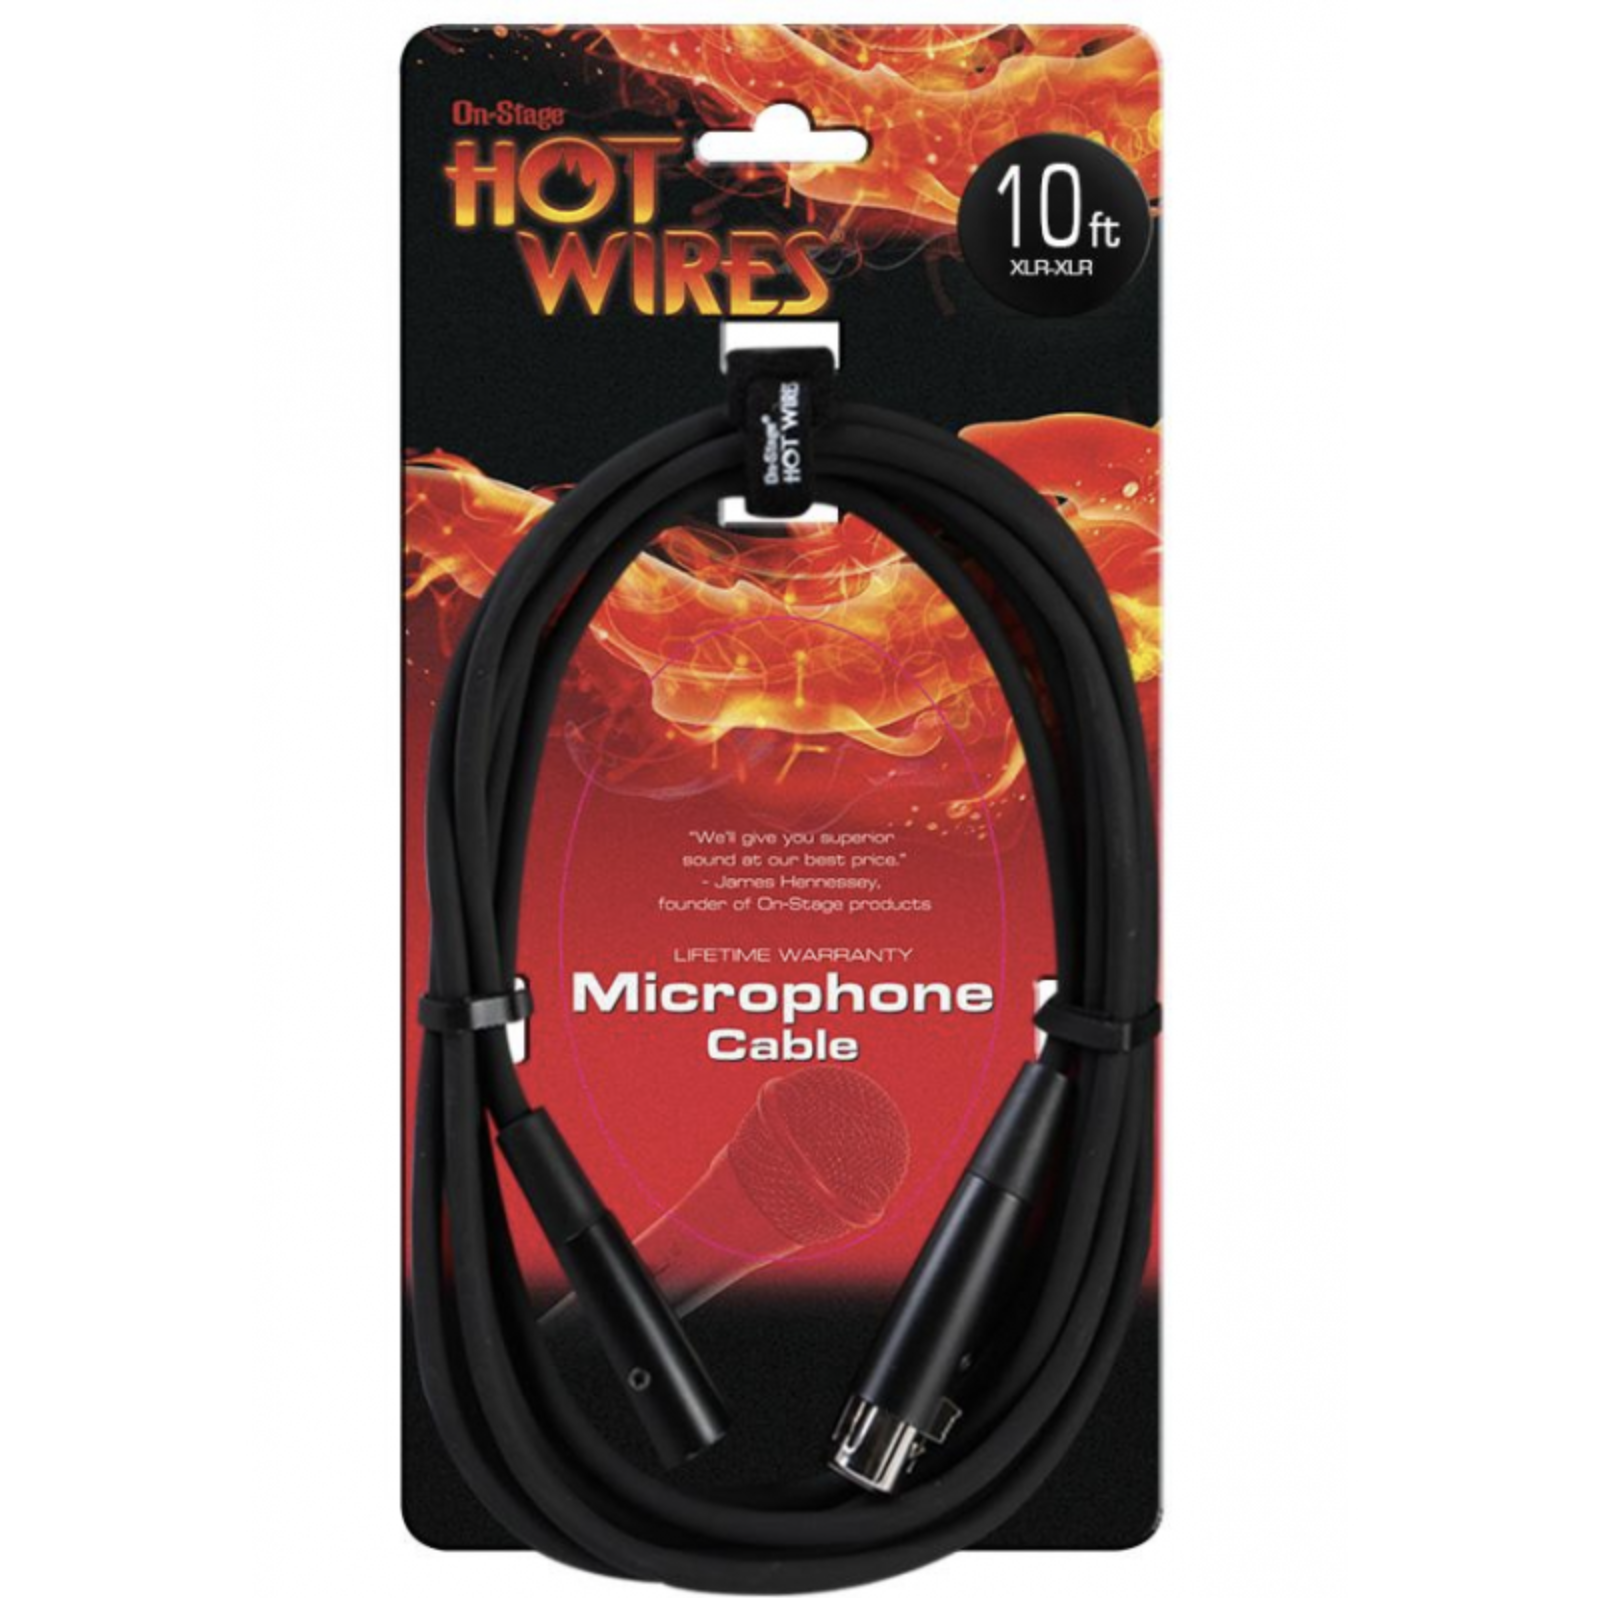 On-Stage Hot Wires MC12-10 Mic Cable XLR-1